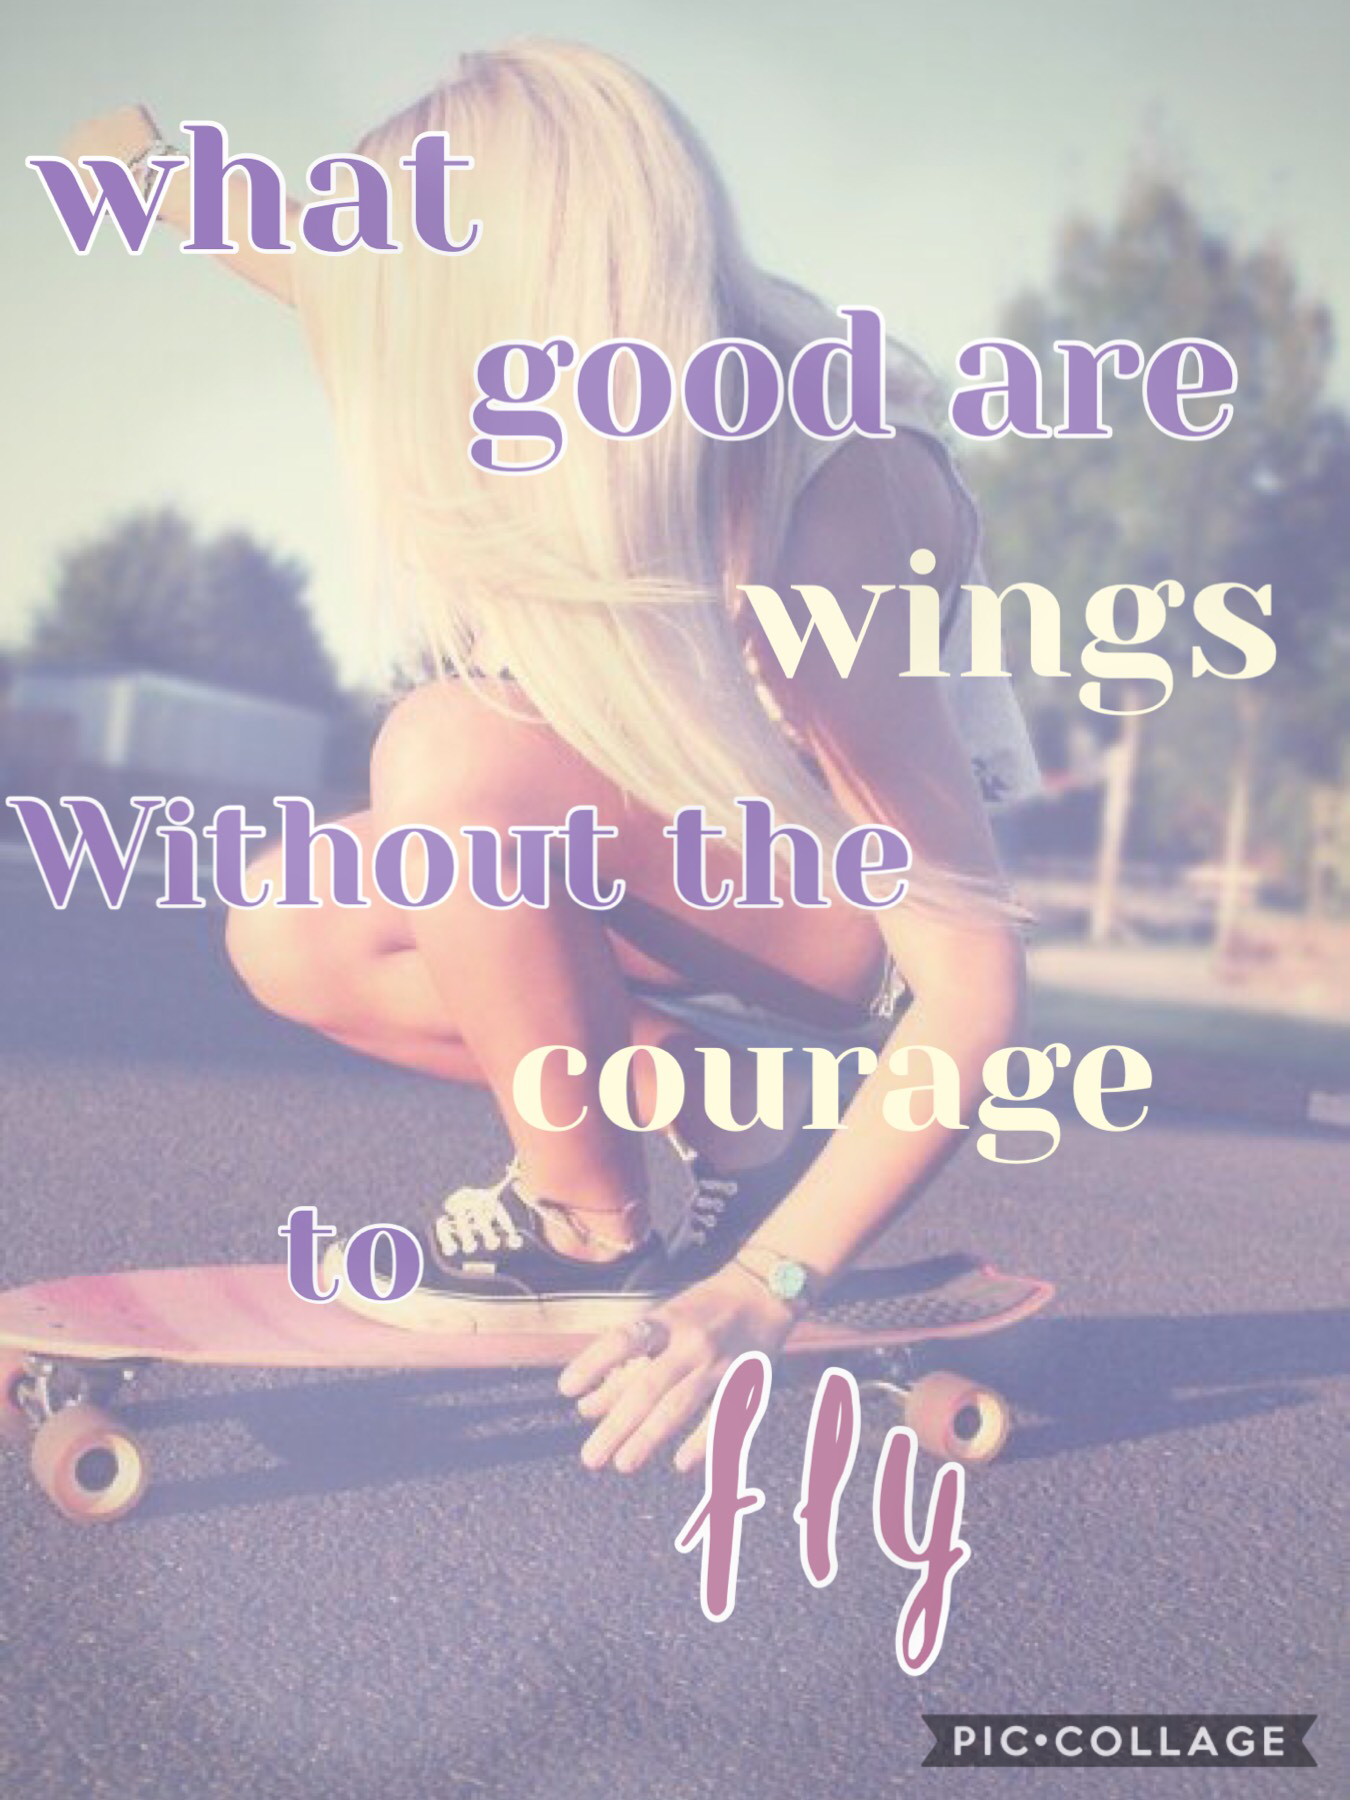 What good are wings without the courage to fly?